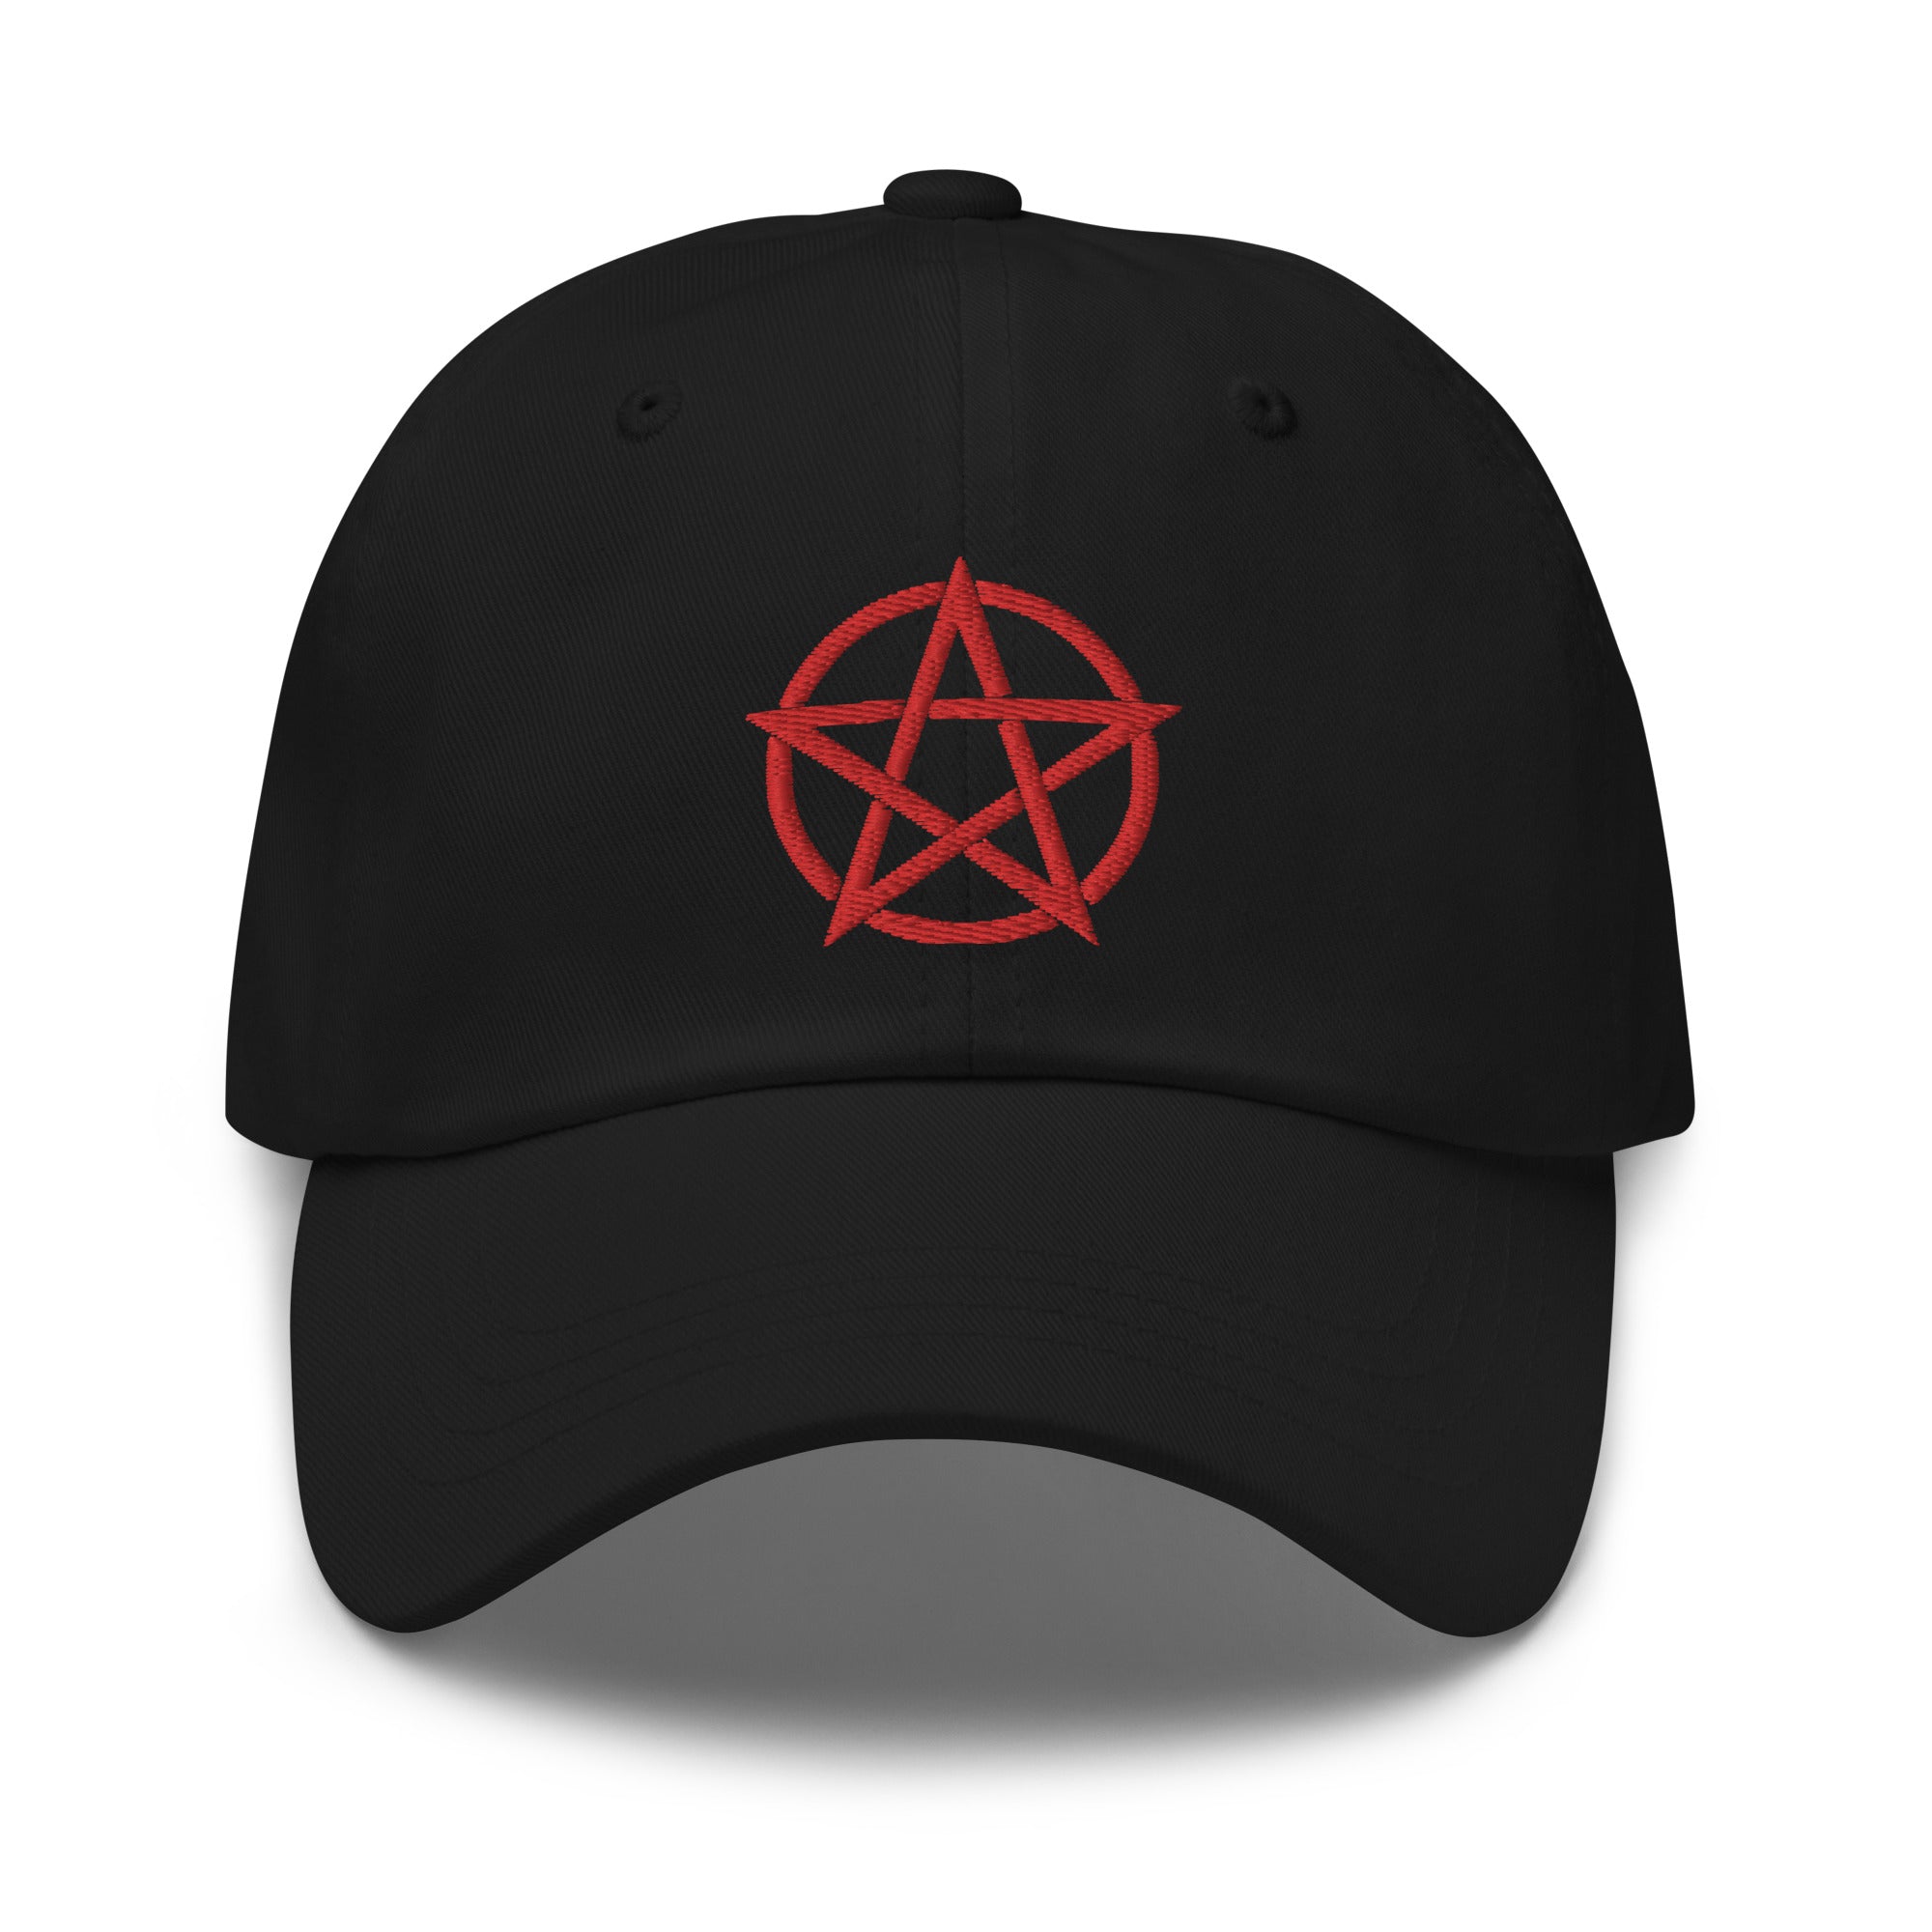 Witchcraft Woven Pentacle Pagan Ritual Embroidered Baseball Cap Pentagram Dad hat - Edge of Life Designs